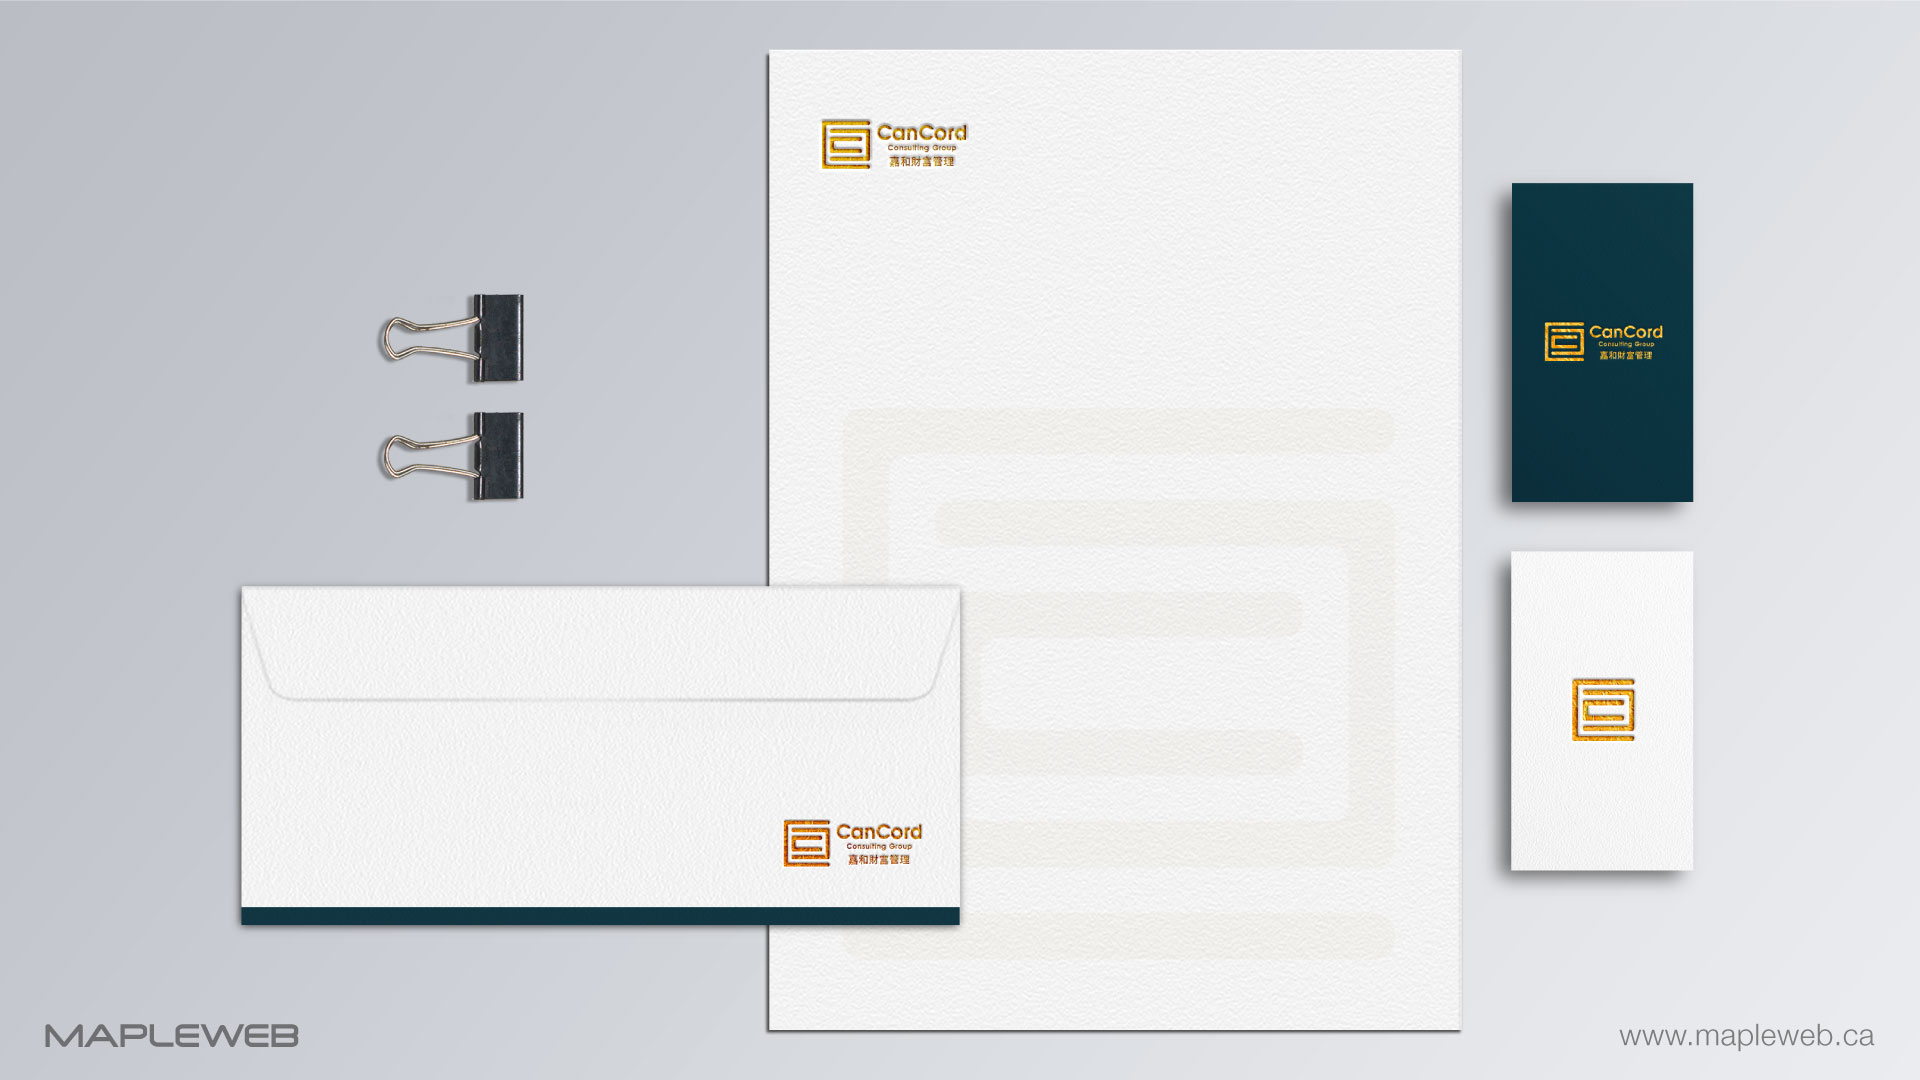 cancord-consulting-group-brand-logo-design-by-mapleweb-vancouver-canada-stationery-mock